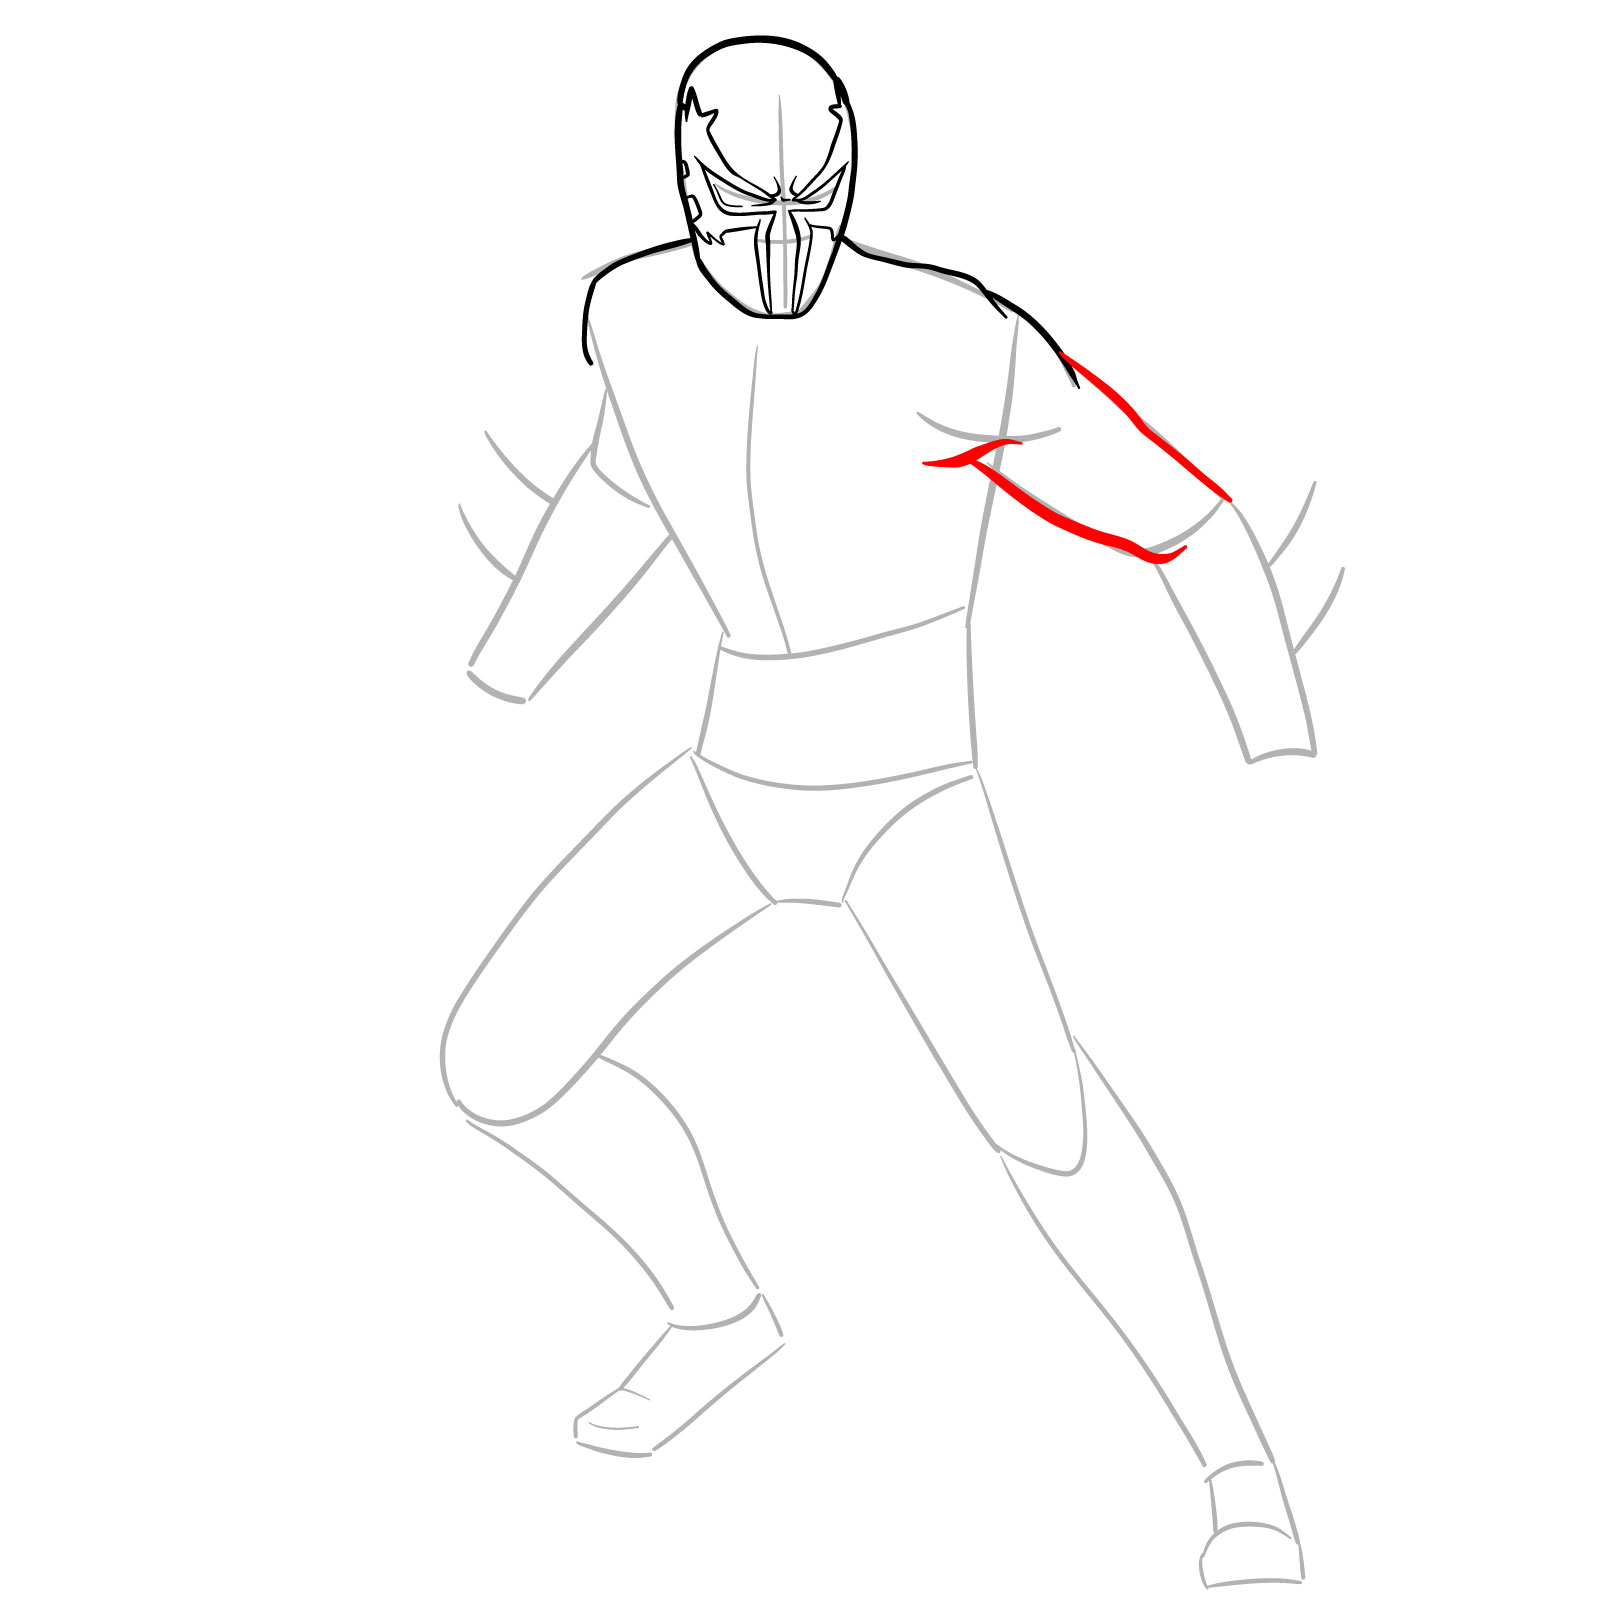 How to draw Spider-Man 2099 - step 12